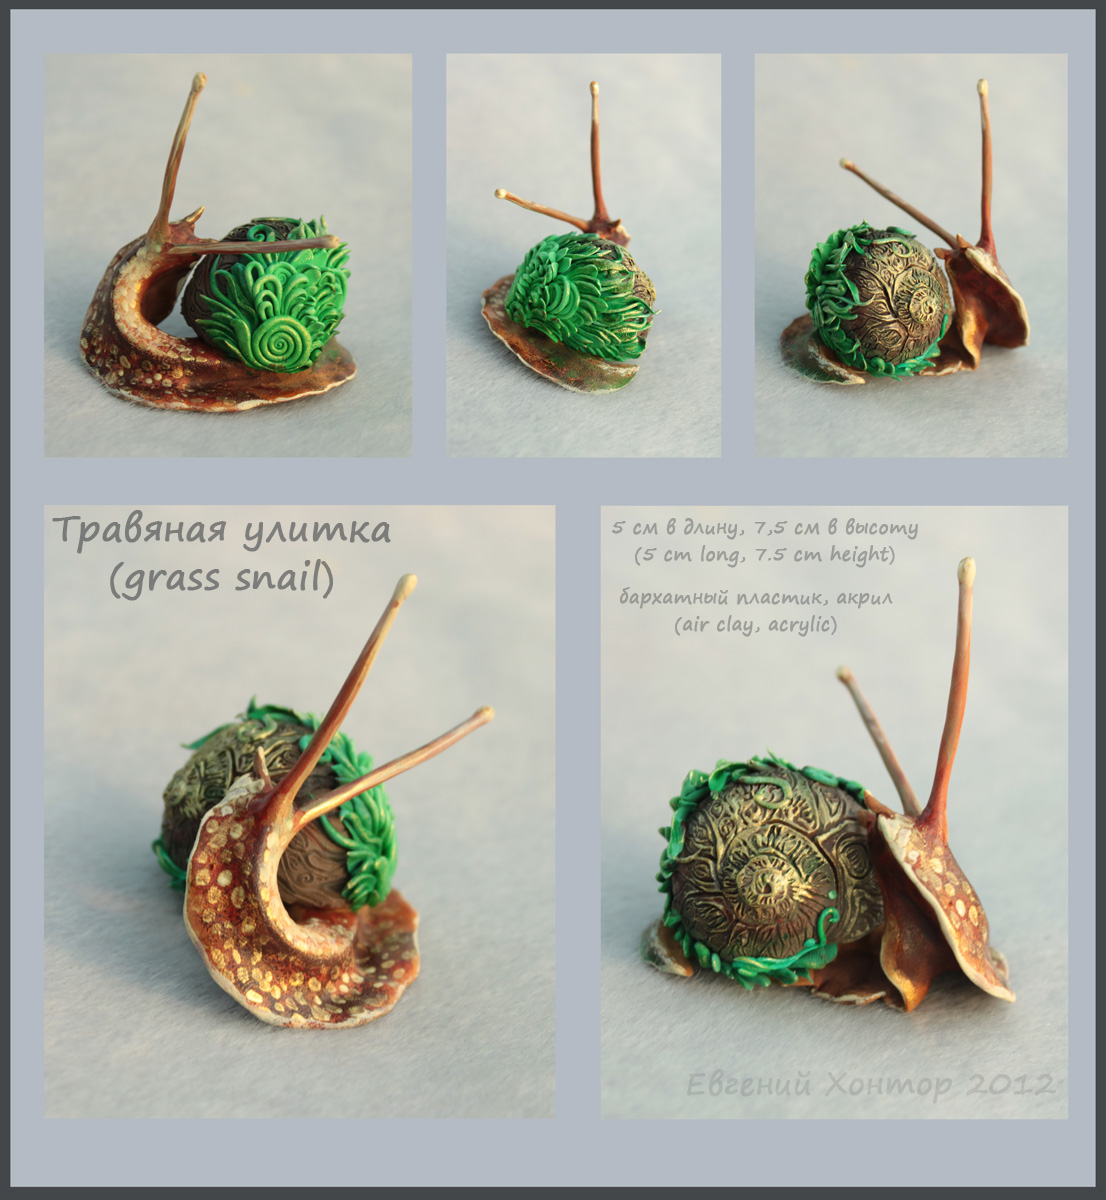 Grass snail - for sale